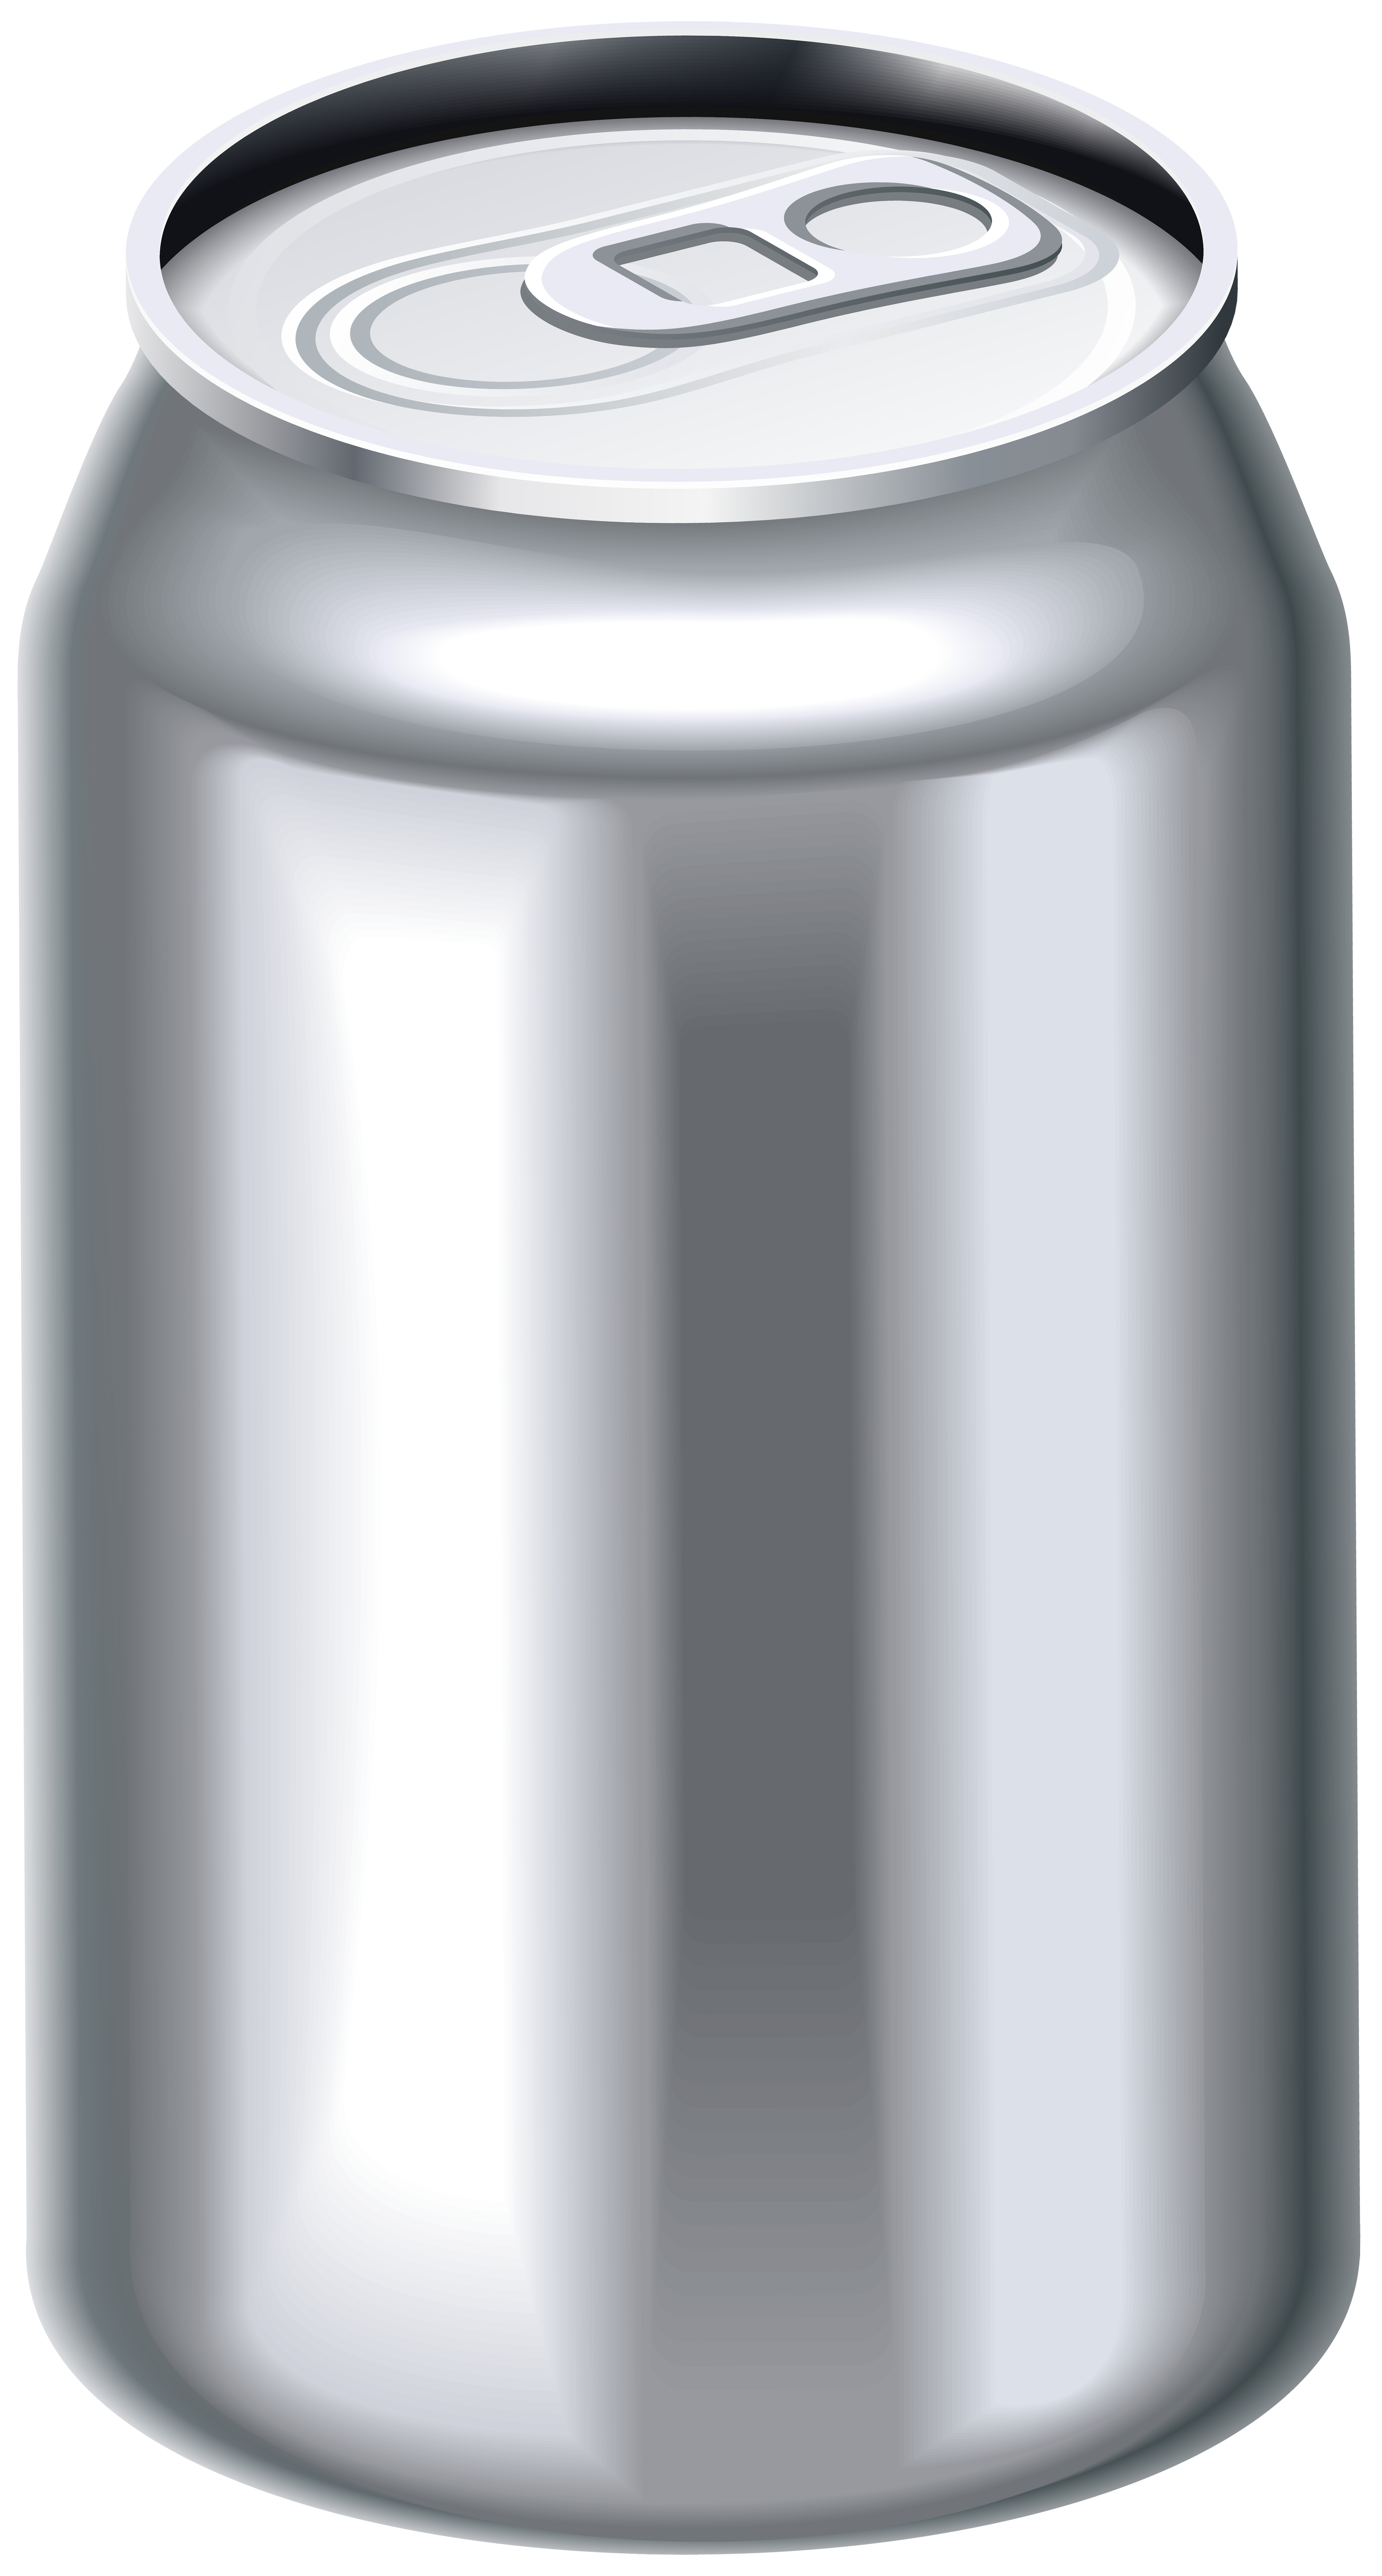 Metal Drinks Can PNG Clip Art.